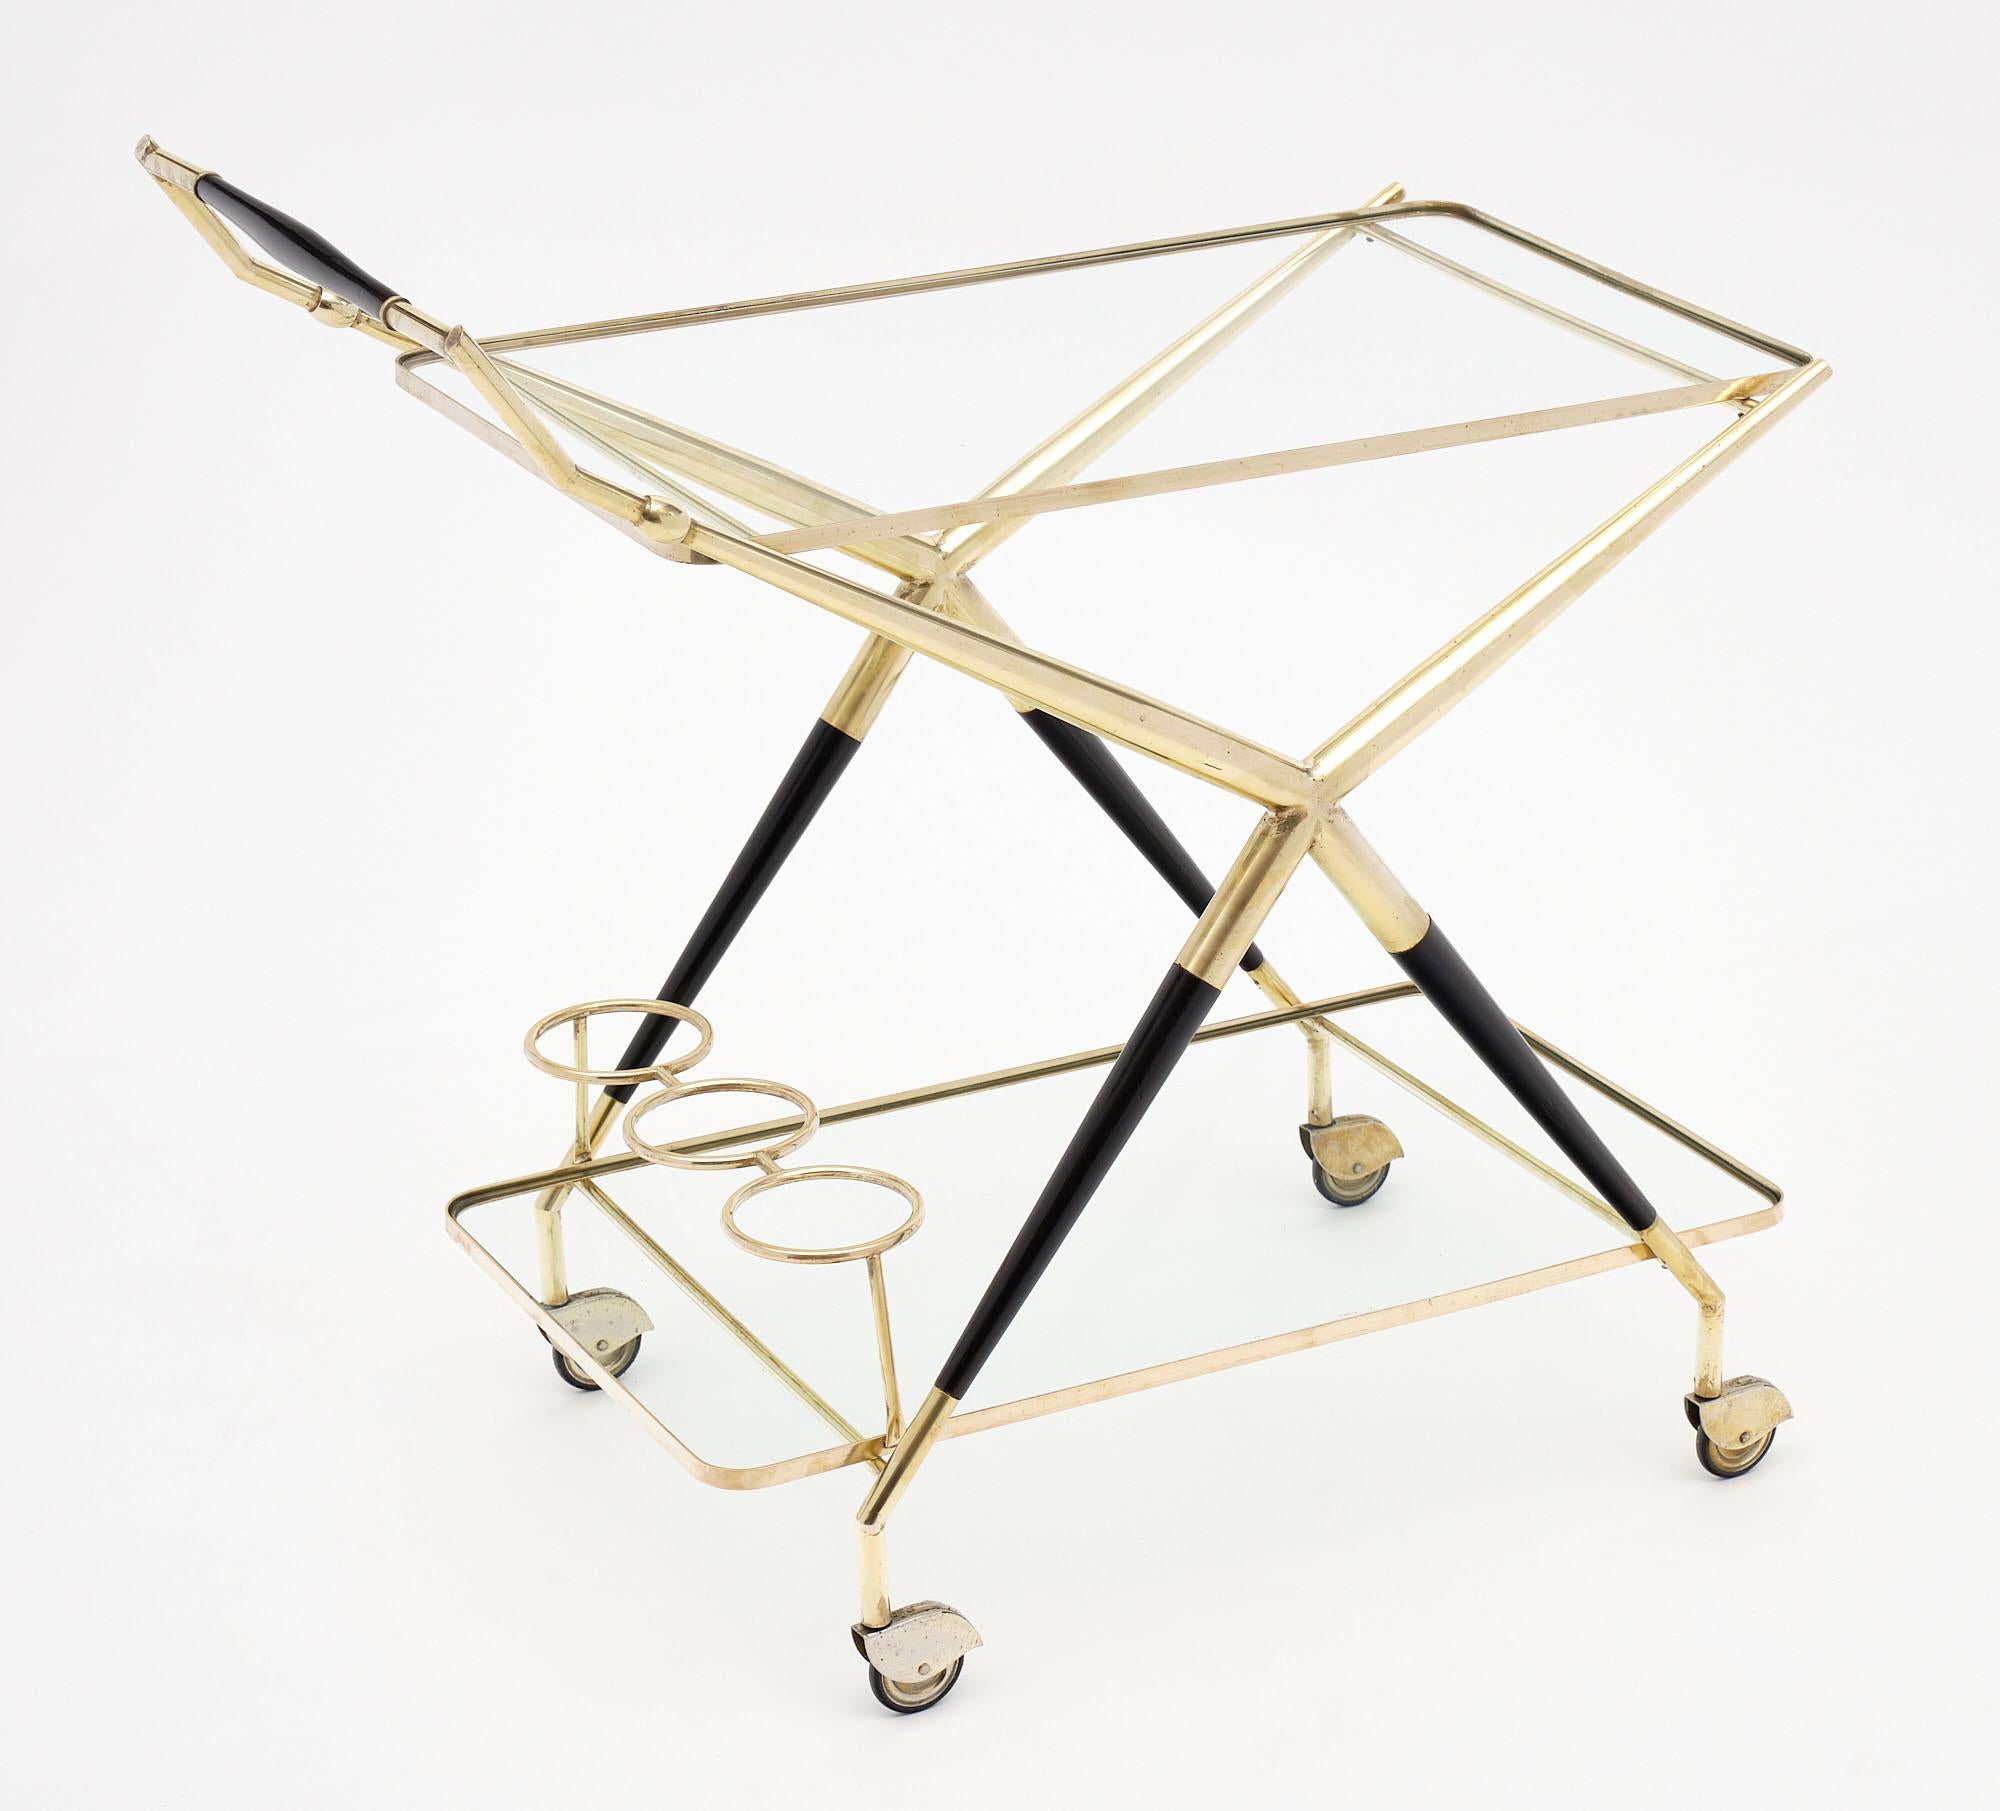 Bar cart by Italian designer Cesare Lacca featuring a solid polished brass and wood structure with original casters. There are two glass shelves and three bottle holders. This is a distinguished companion at cocktail hour!